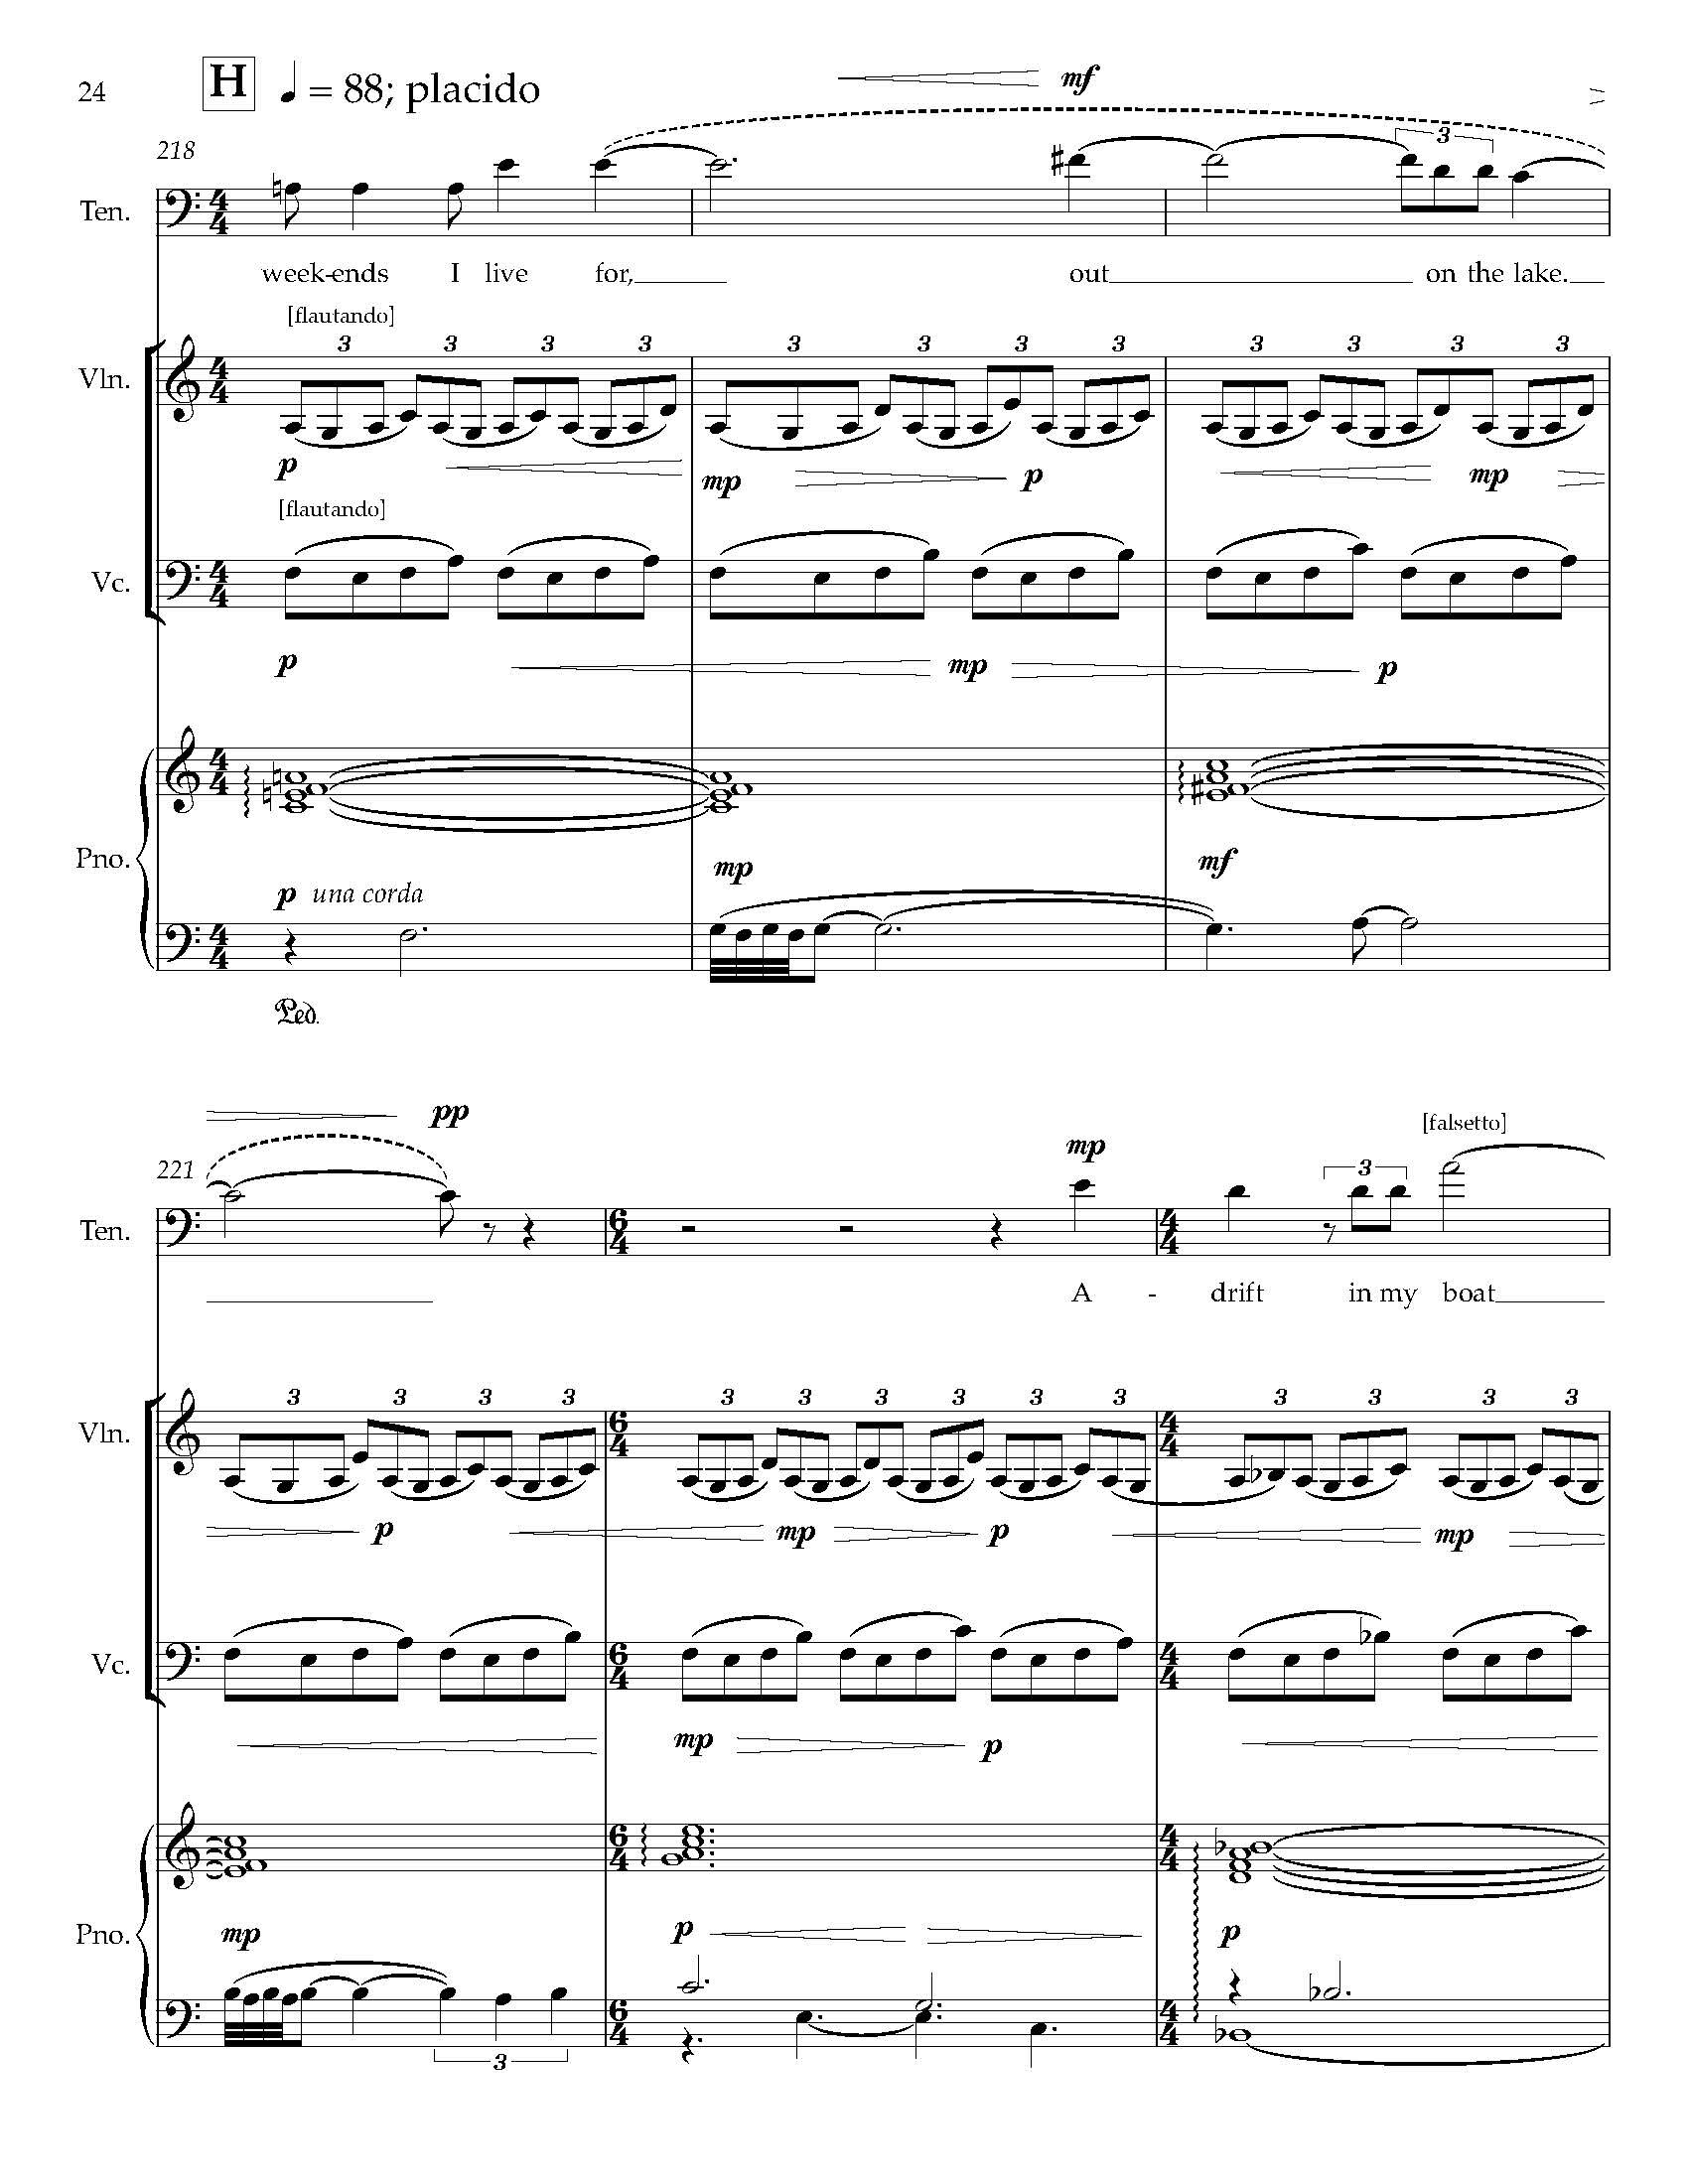 Gursky Songs - Complete Score_Page_32.jpg